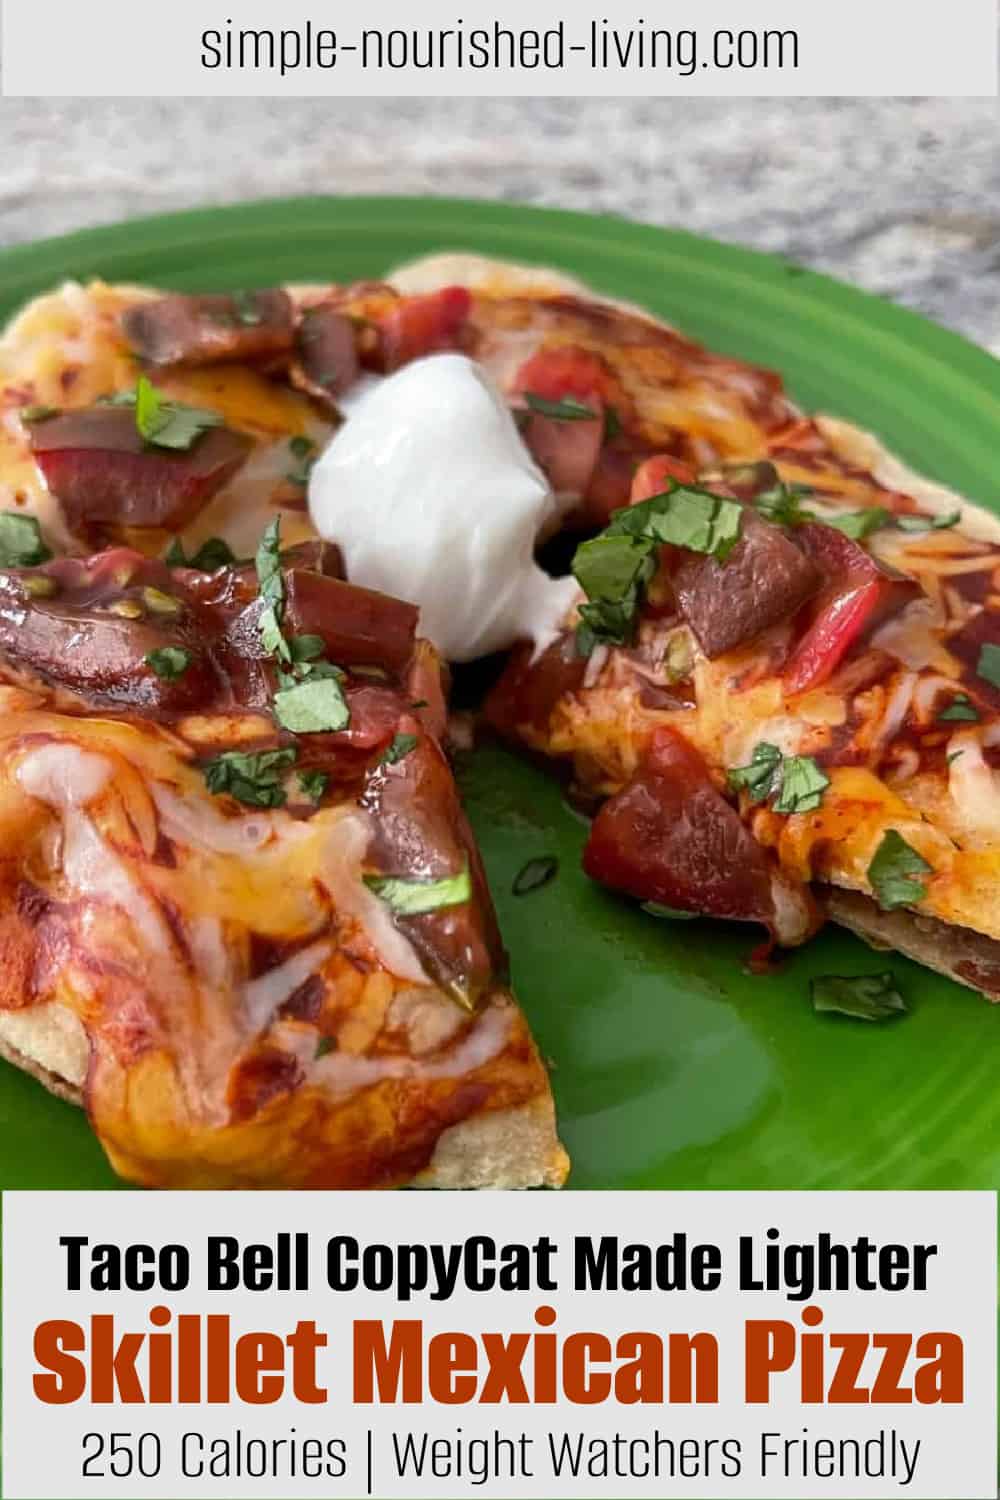 Skillet Mexican Pizza topped with lite sour cream on small green plate with slice removed.